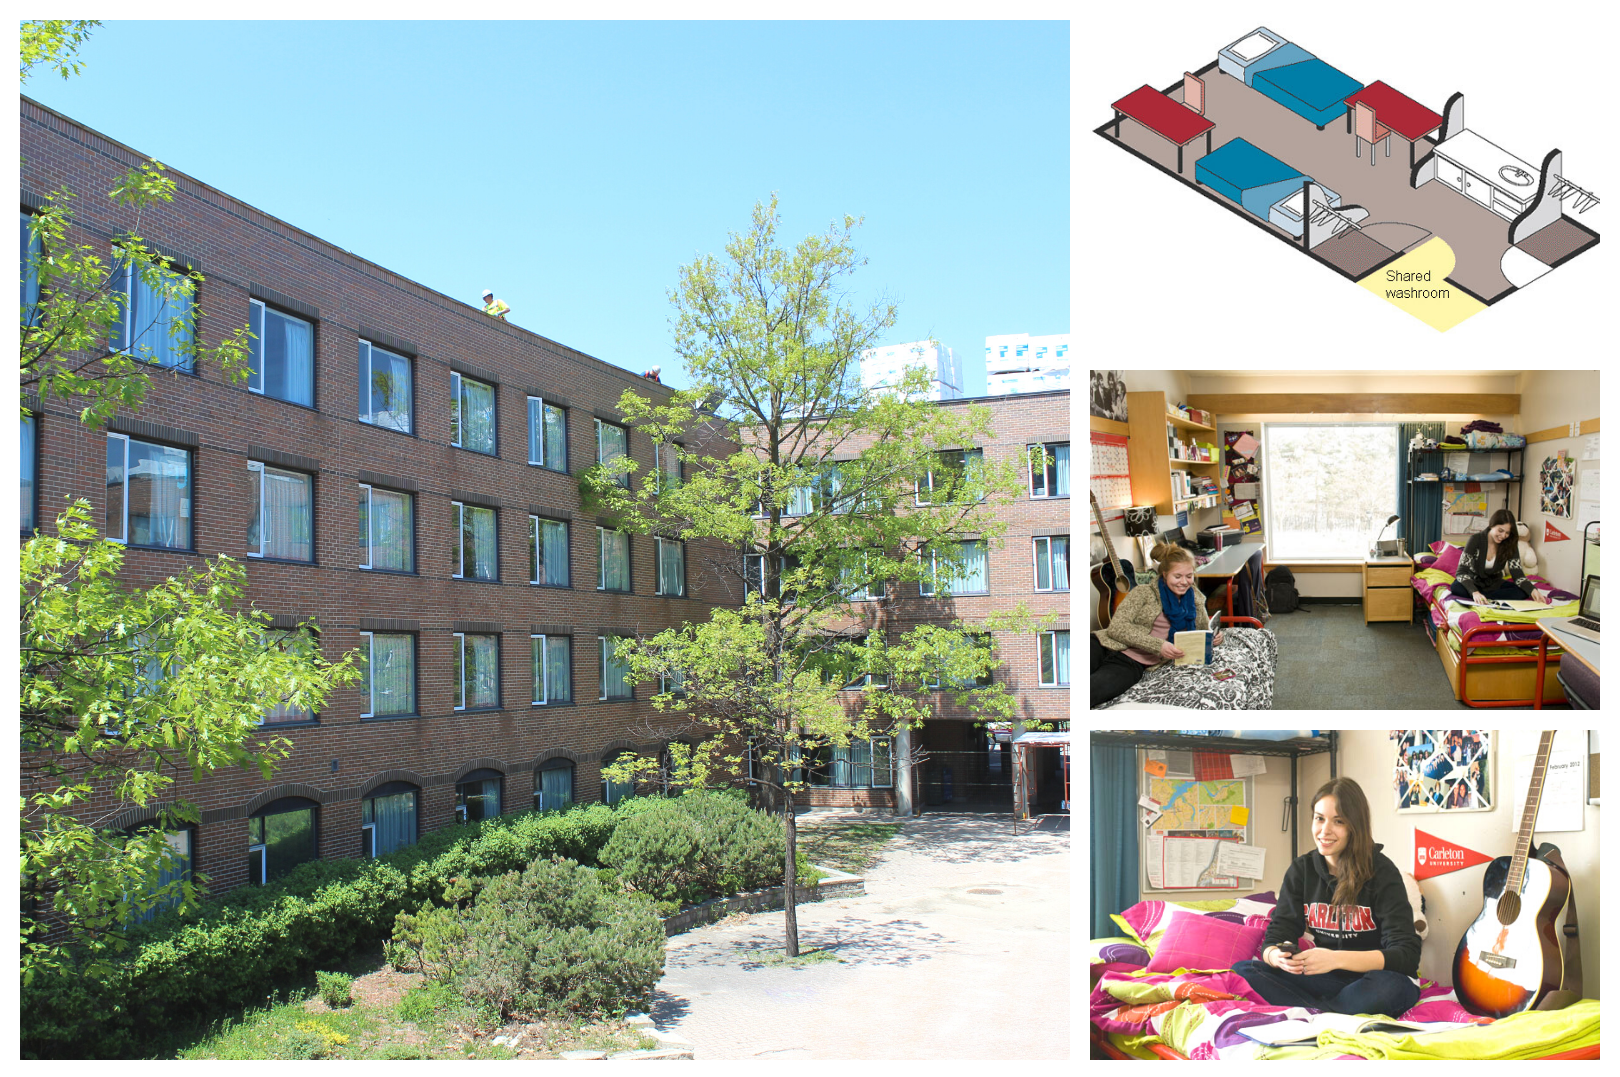 Images of Dundas House with floor plan and rooms. Building details: Opened in 1991, renovated in 2015, 4 floors, 1 elevators, 262 residents, 4 accessible spaces, mandatory meal plan